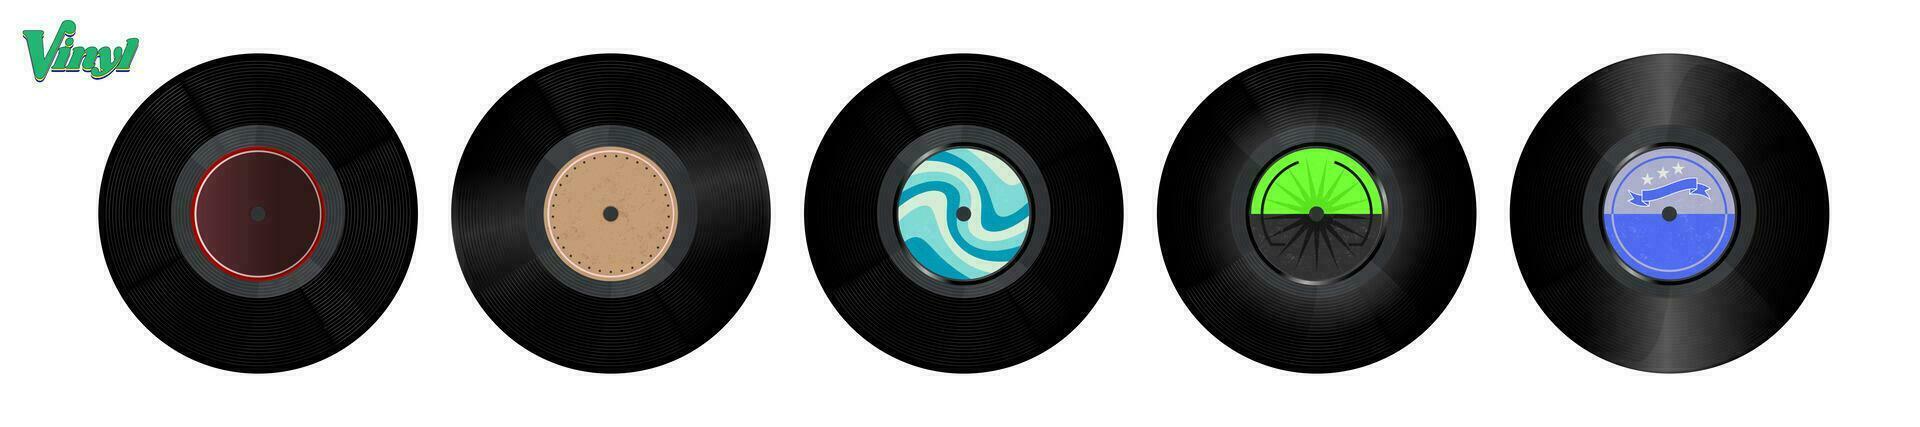 Set of Colorful Vinyl Record Vector Artworks with empty labels for text. Editable Vector Illustration. EPS 10.